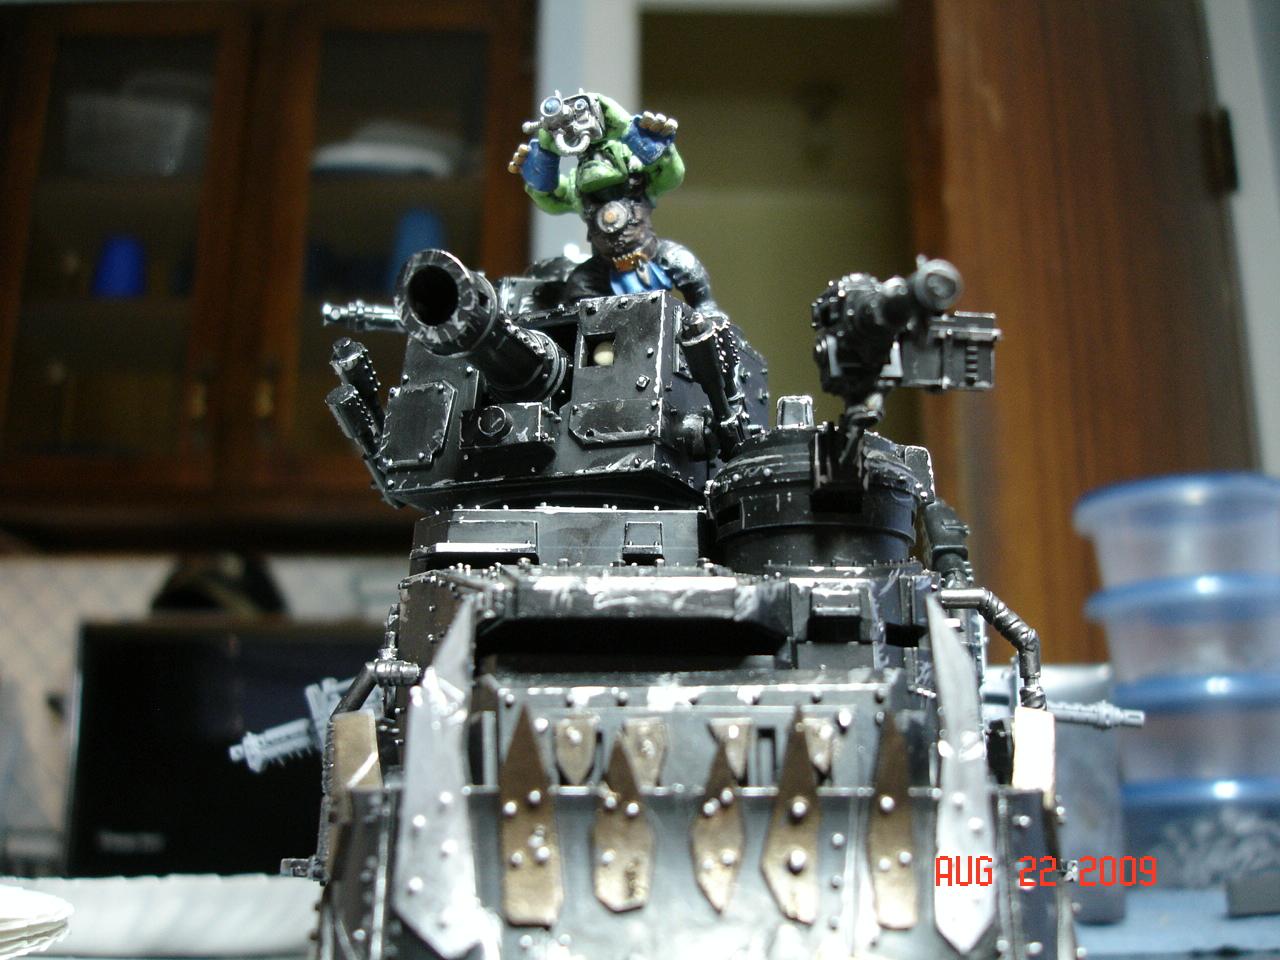 Battlewagon, Orks, Dialing in the shots